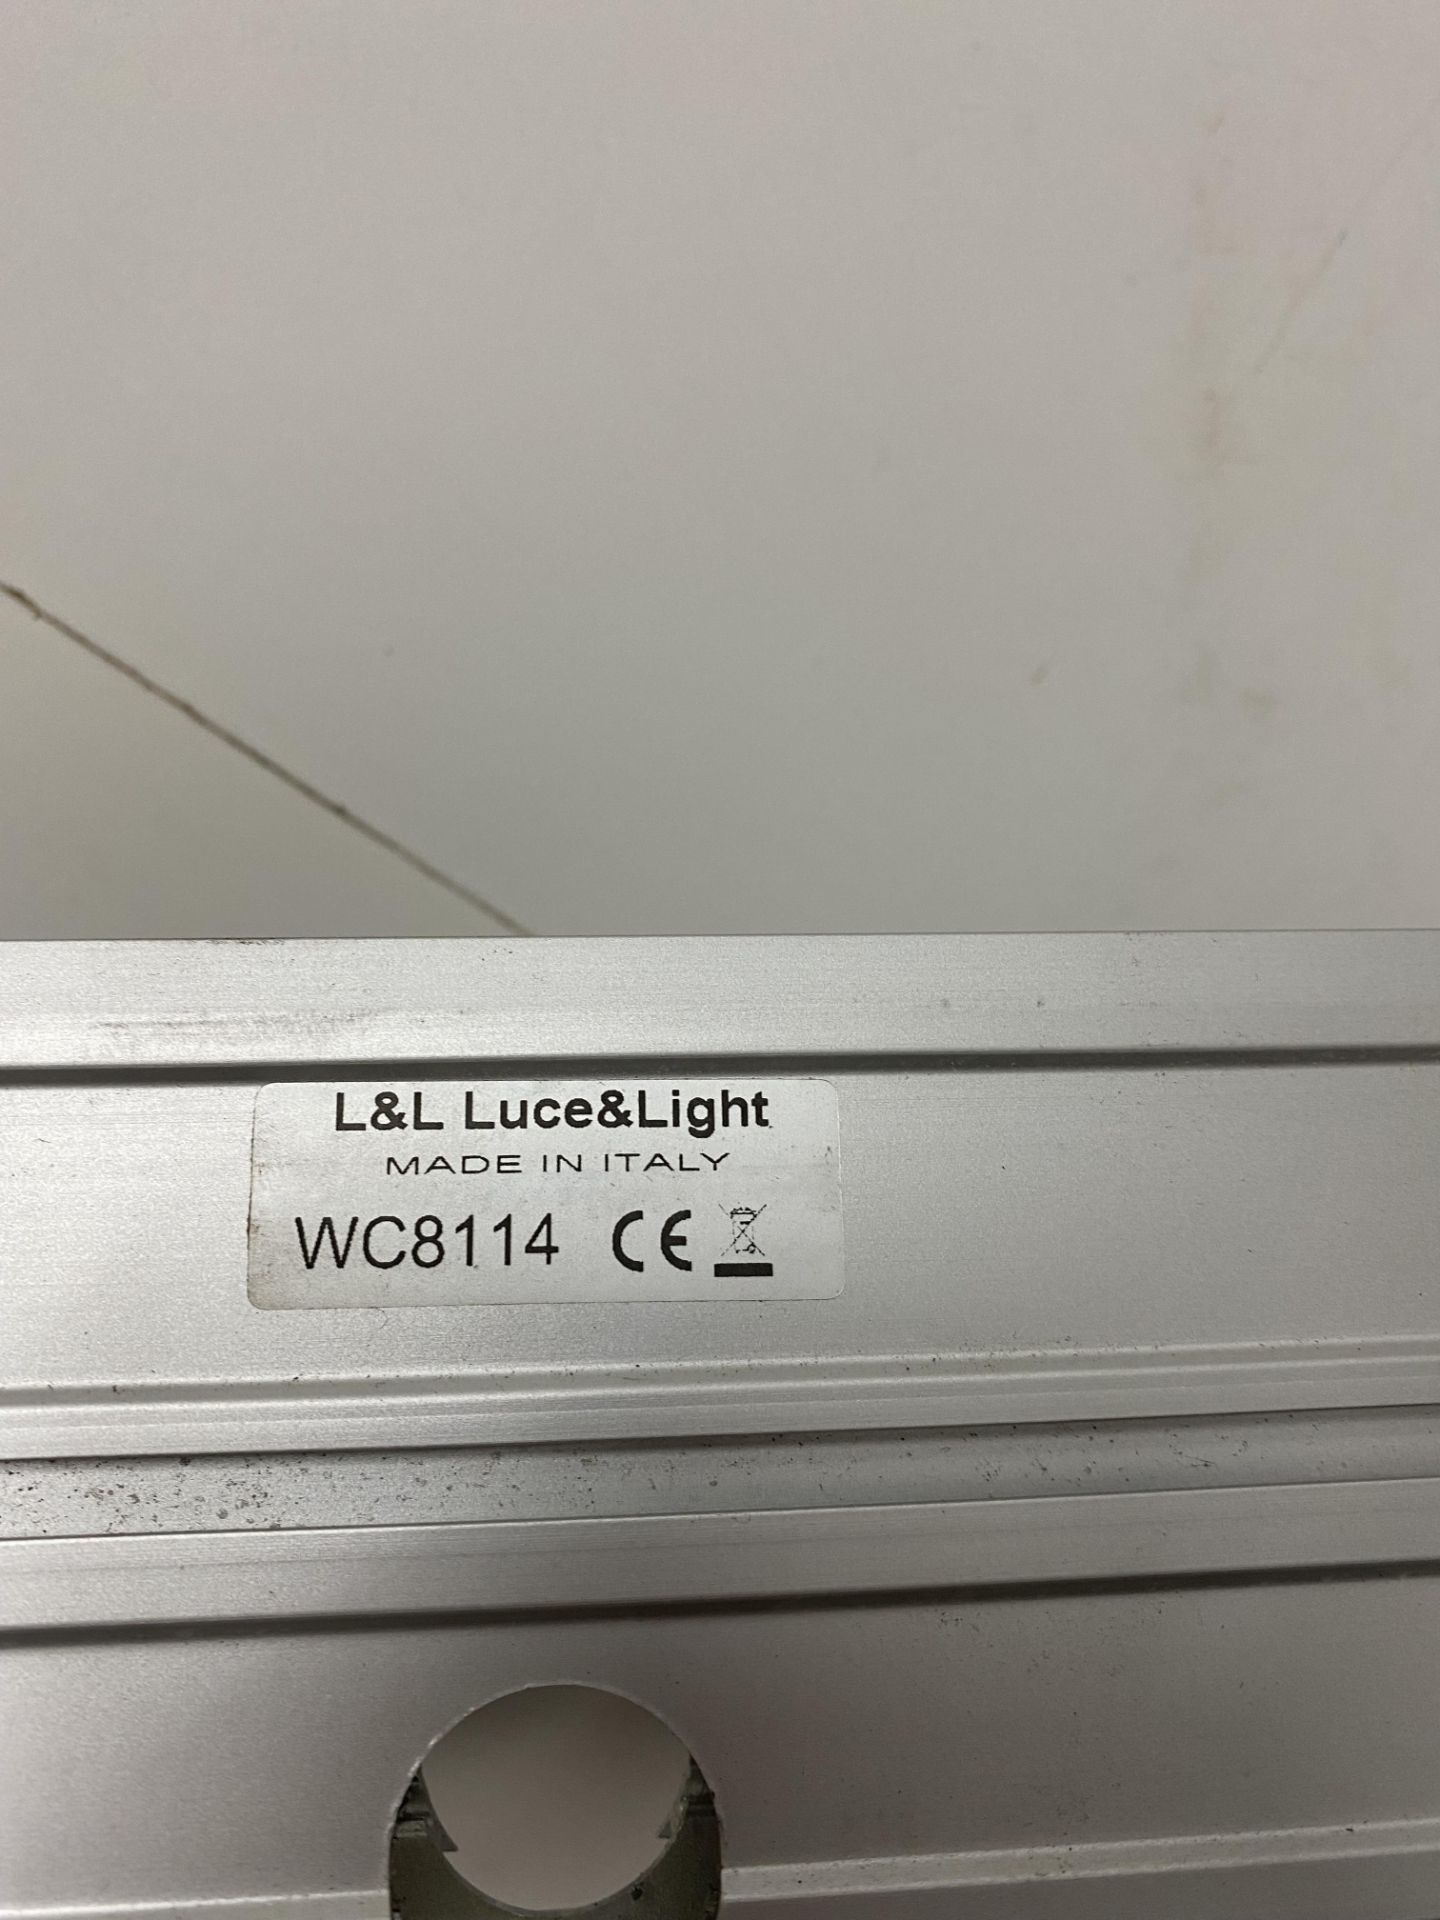 13 x Luce & Light WC8114 Aluminium outer casing - 2015 mm - Image 2 of 4